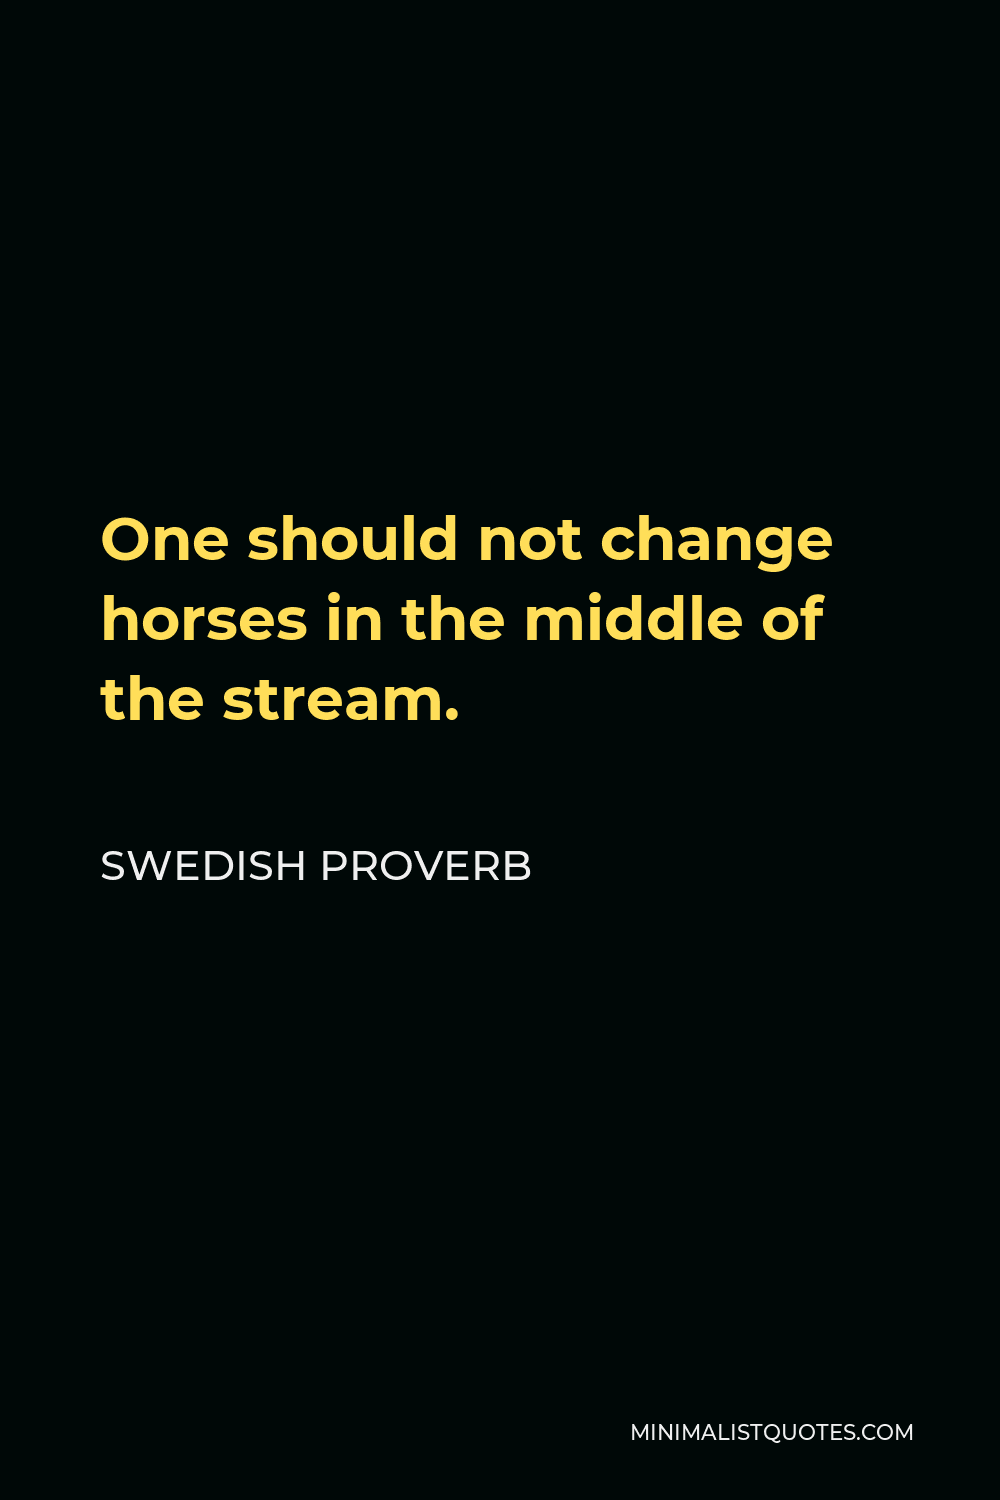 Swedish Proverb Quote - One should not change horses in the middle of the stream.